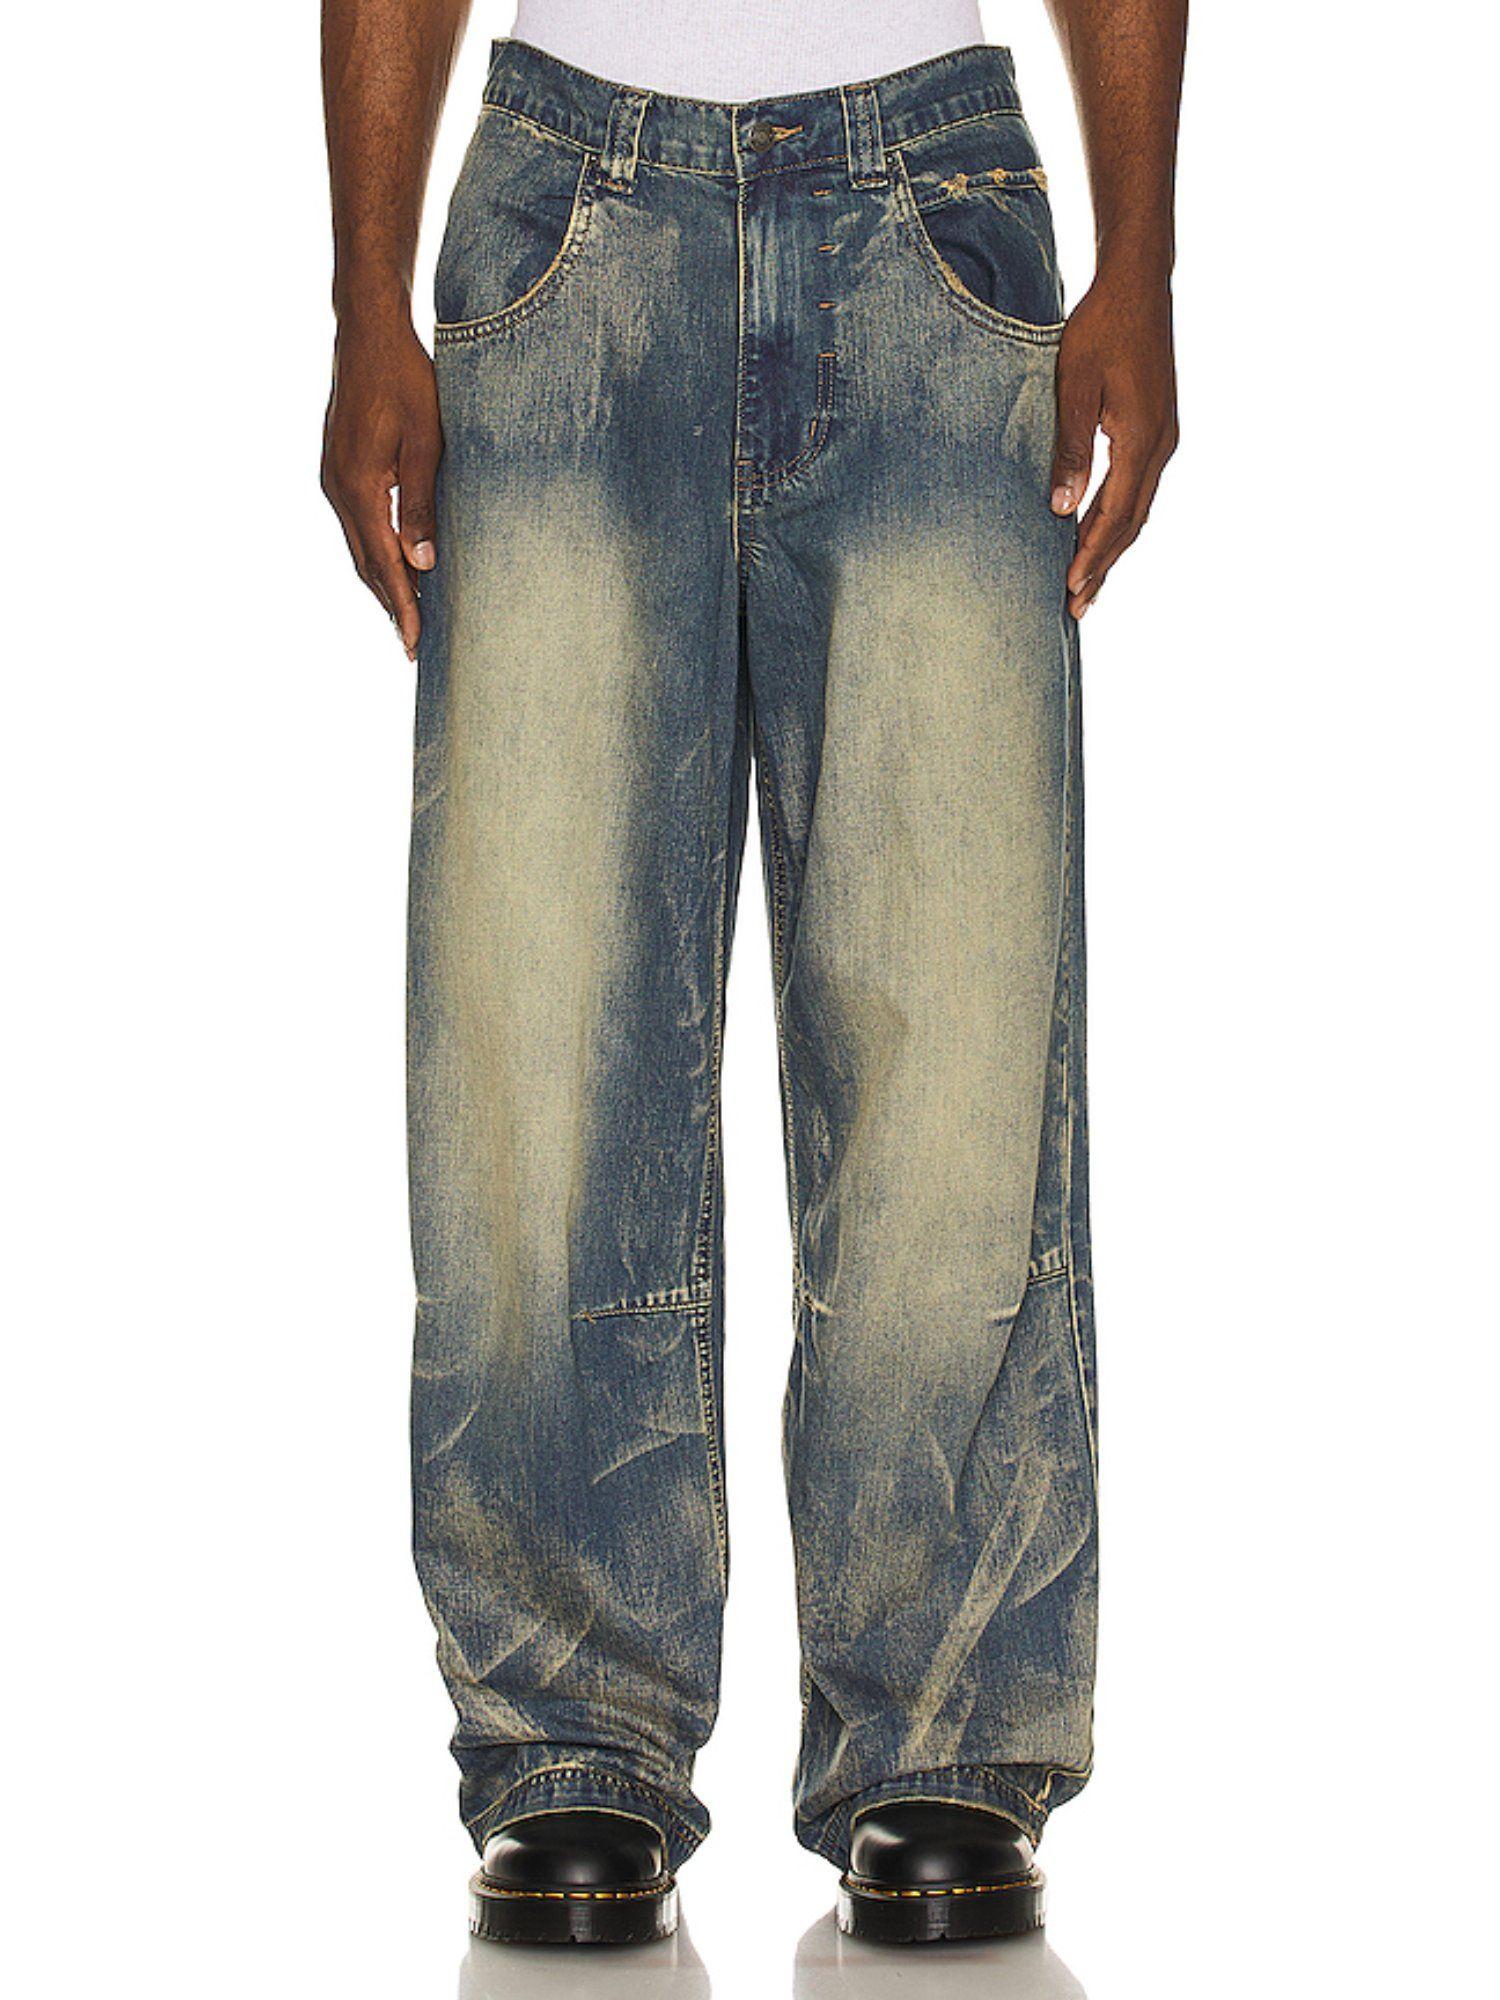 Wing Print Studded Lowrise Colossus Jeans